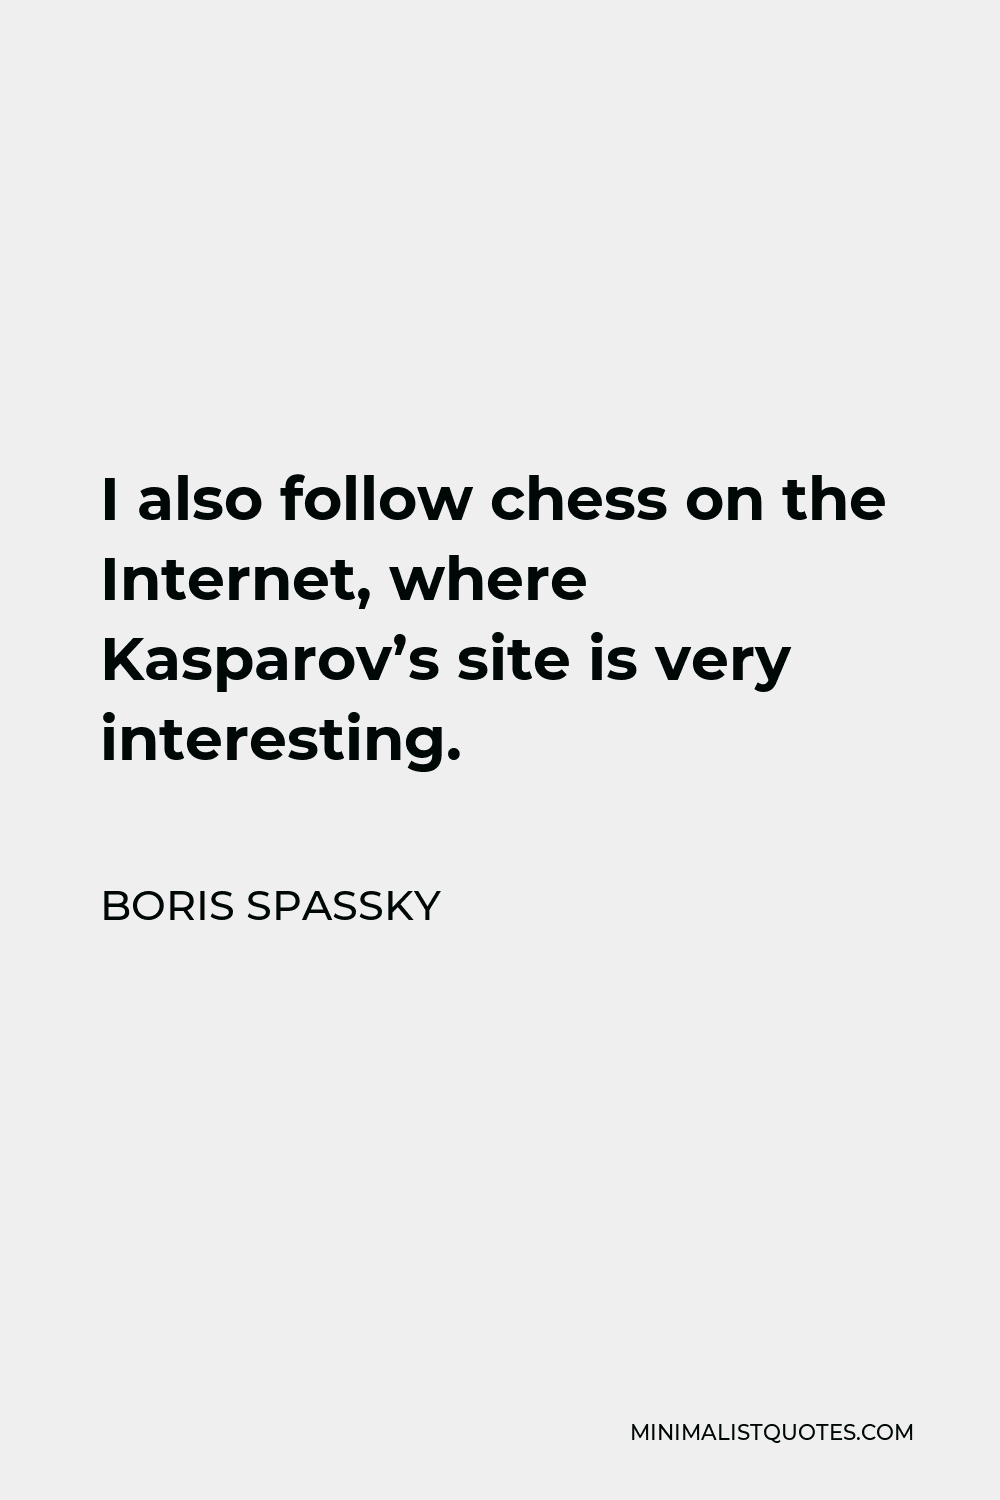 Boris Spassky Quote: “I also follow chess on the Internet, where